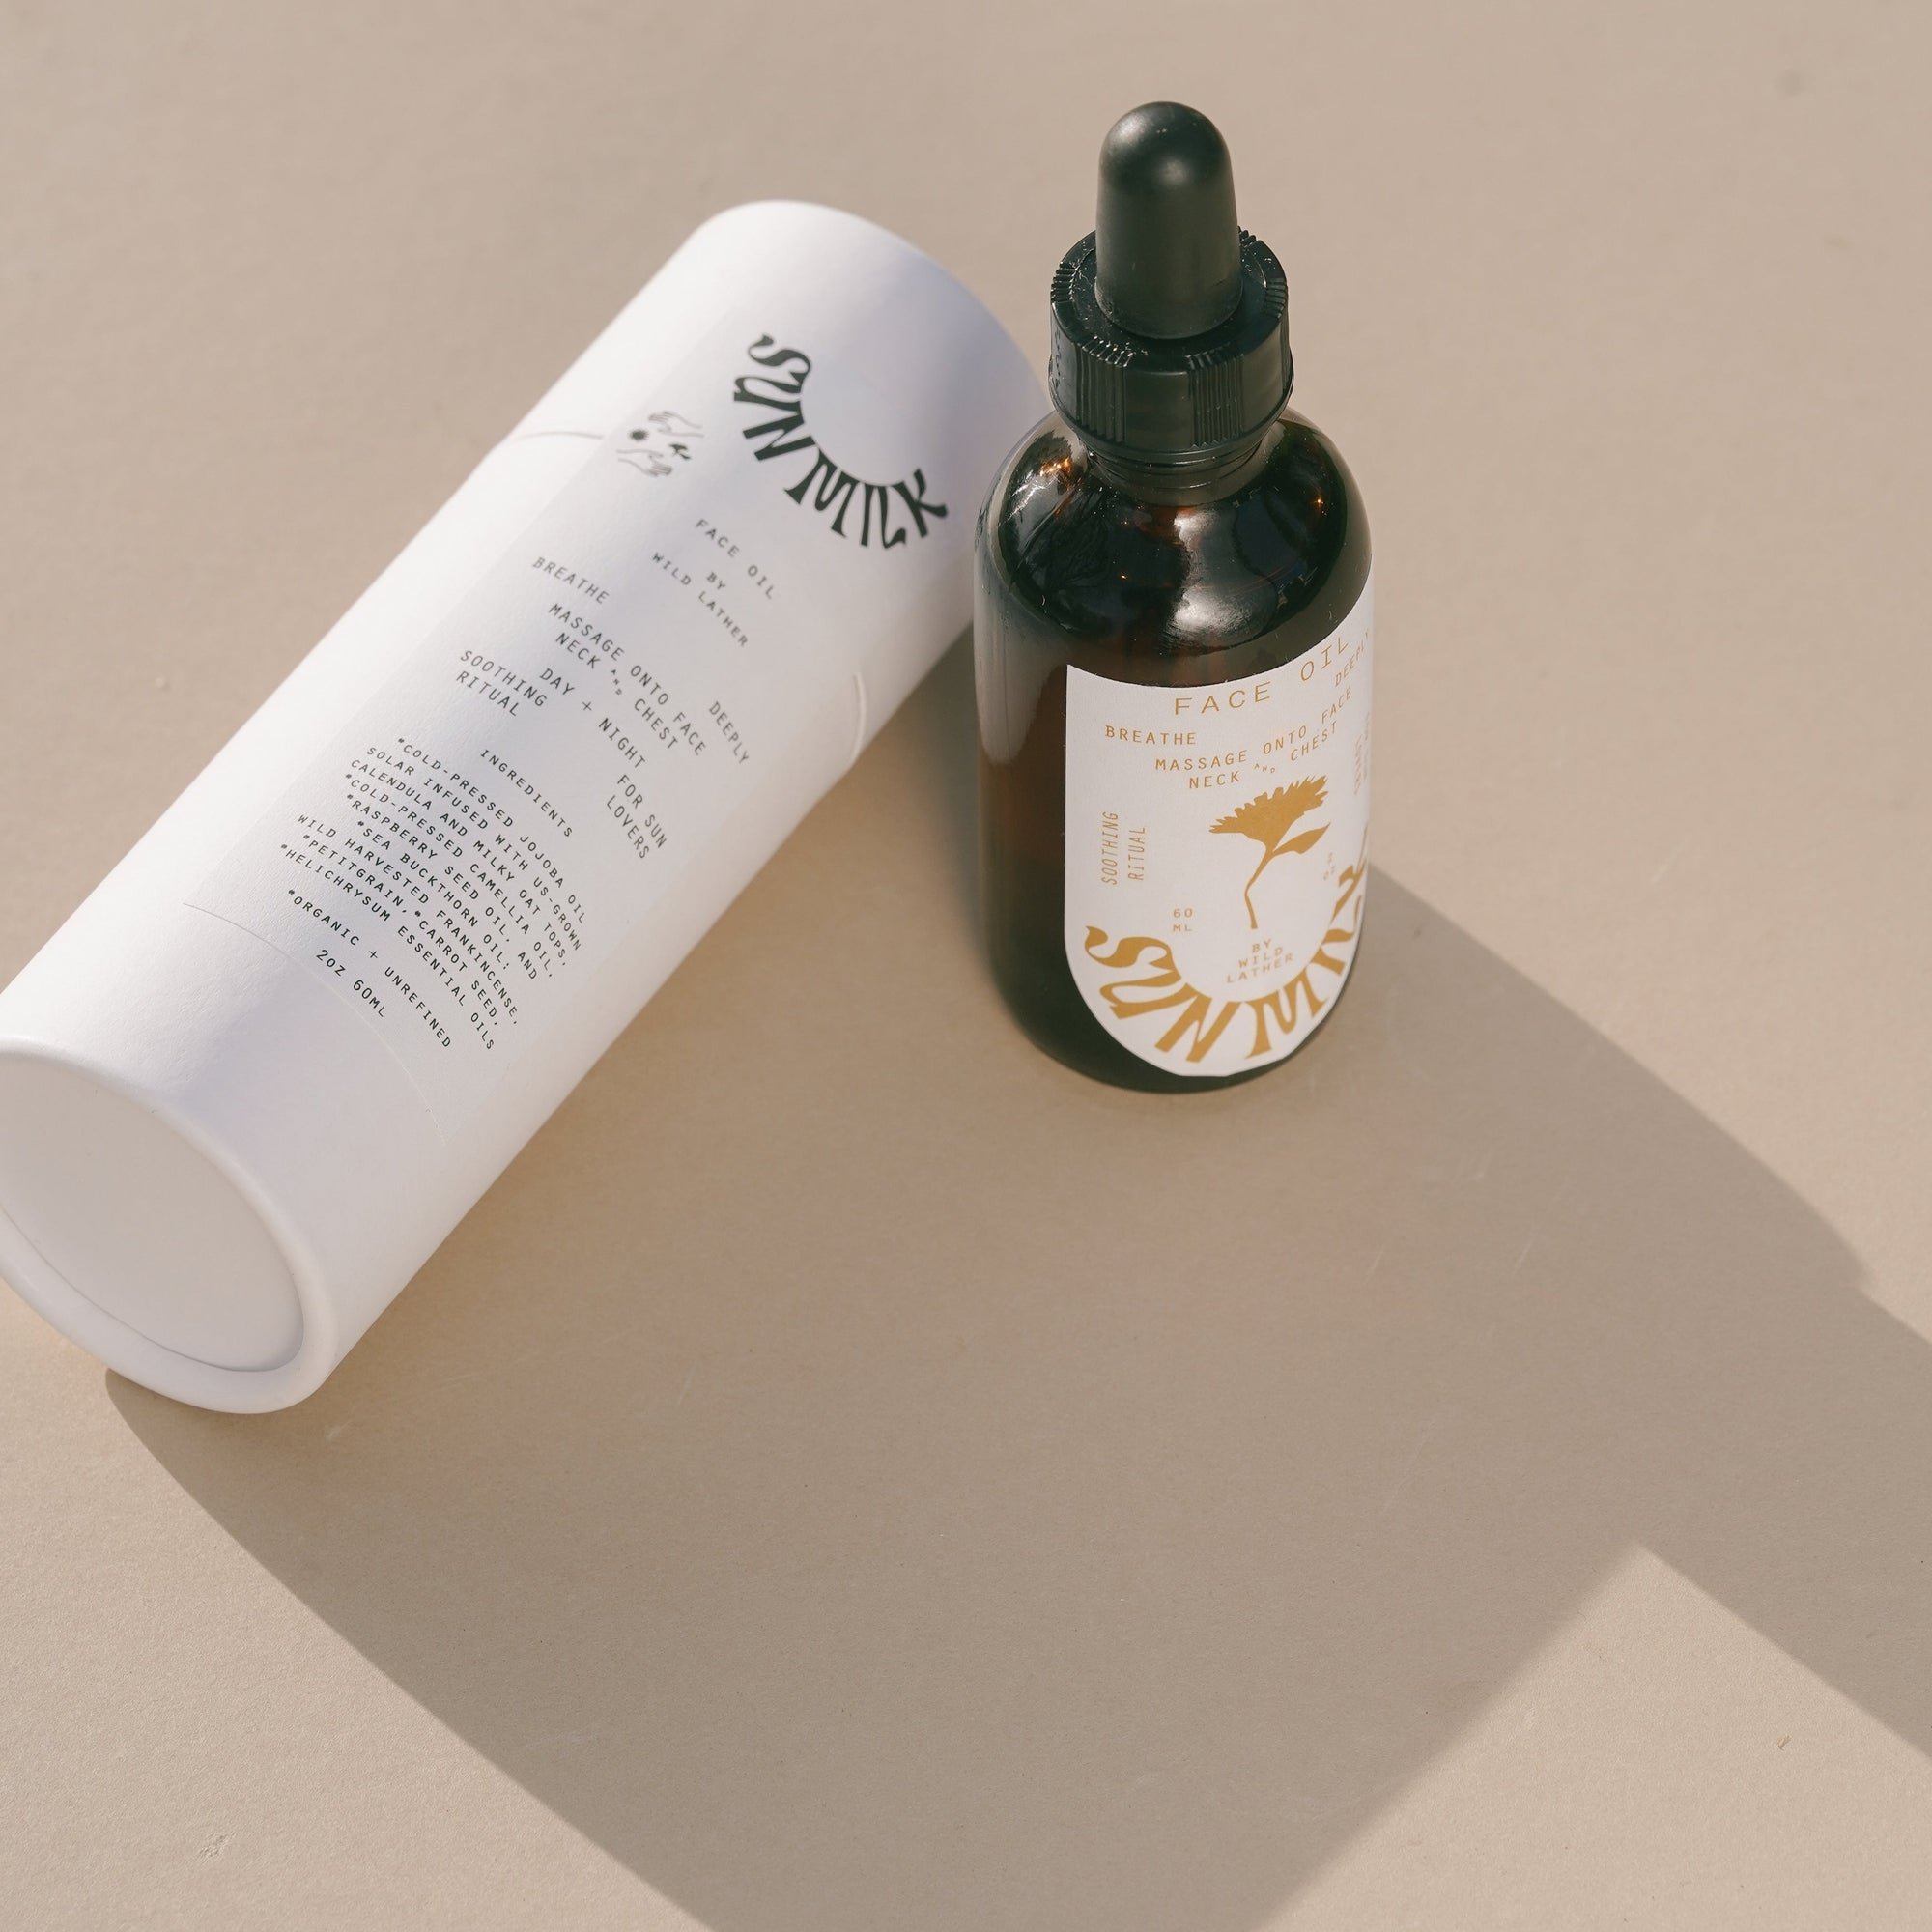 A bottle of Sun Milk Oil next to its white paper tube packaging on a beige surface with shadows